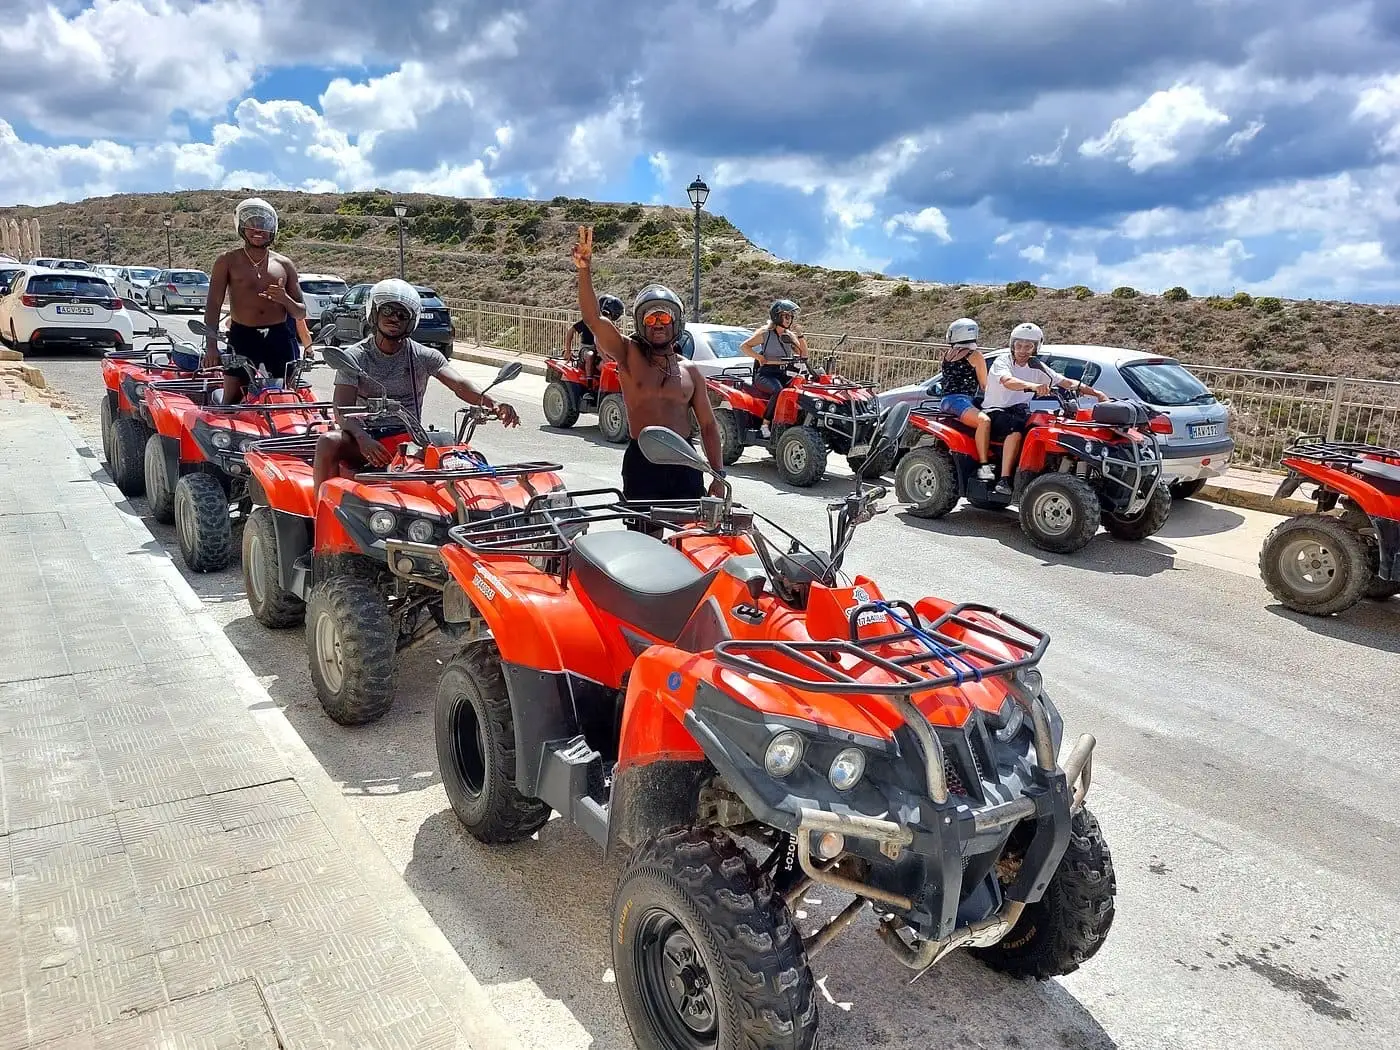 Two lines of quads in Gozo with tourists